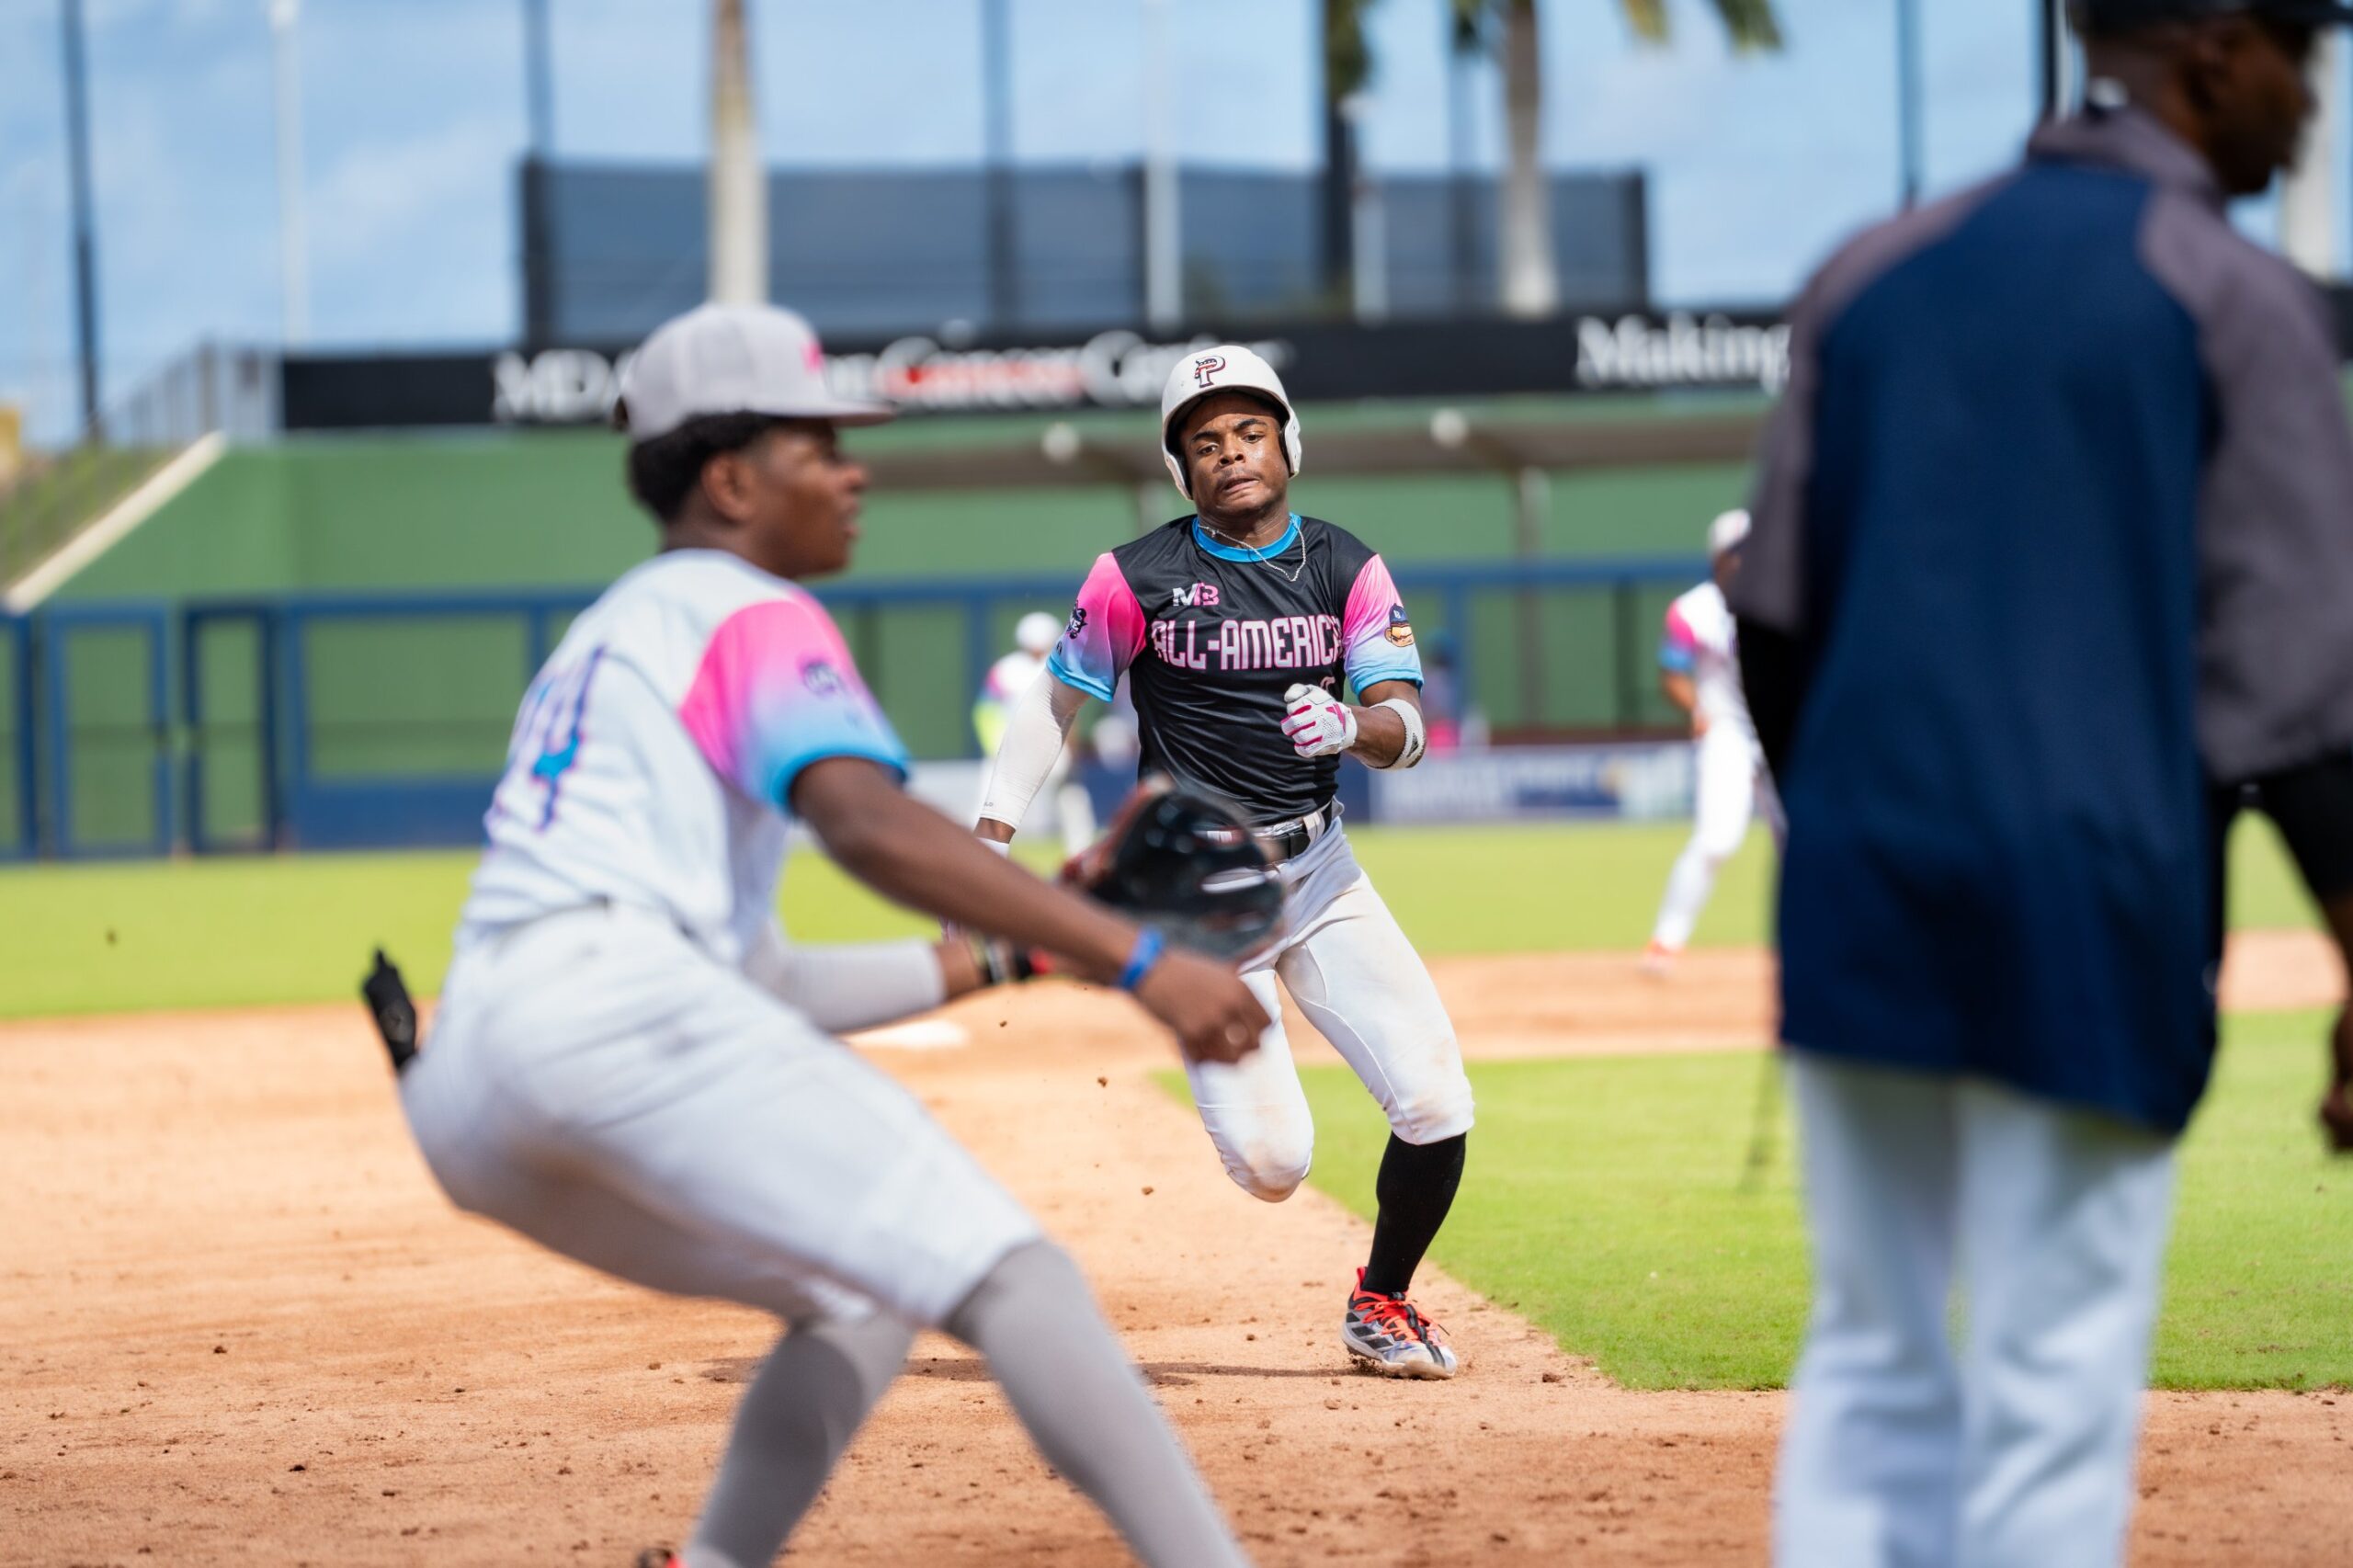 Standout Players From The 2023 Minority Baseball Prospects AllAmerican